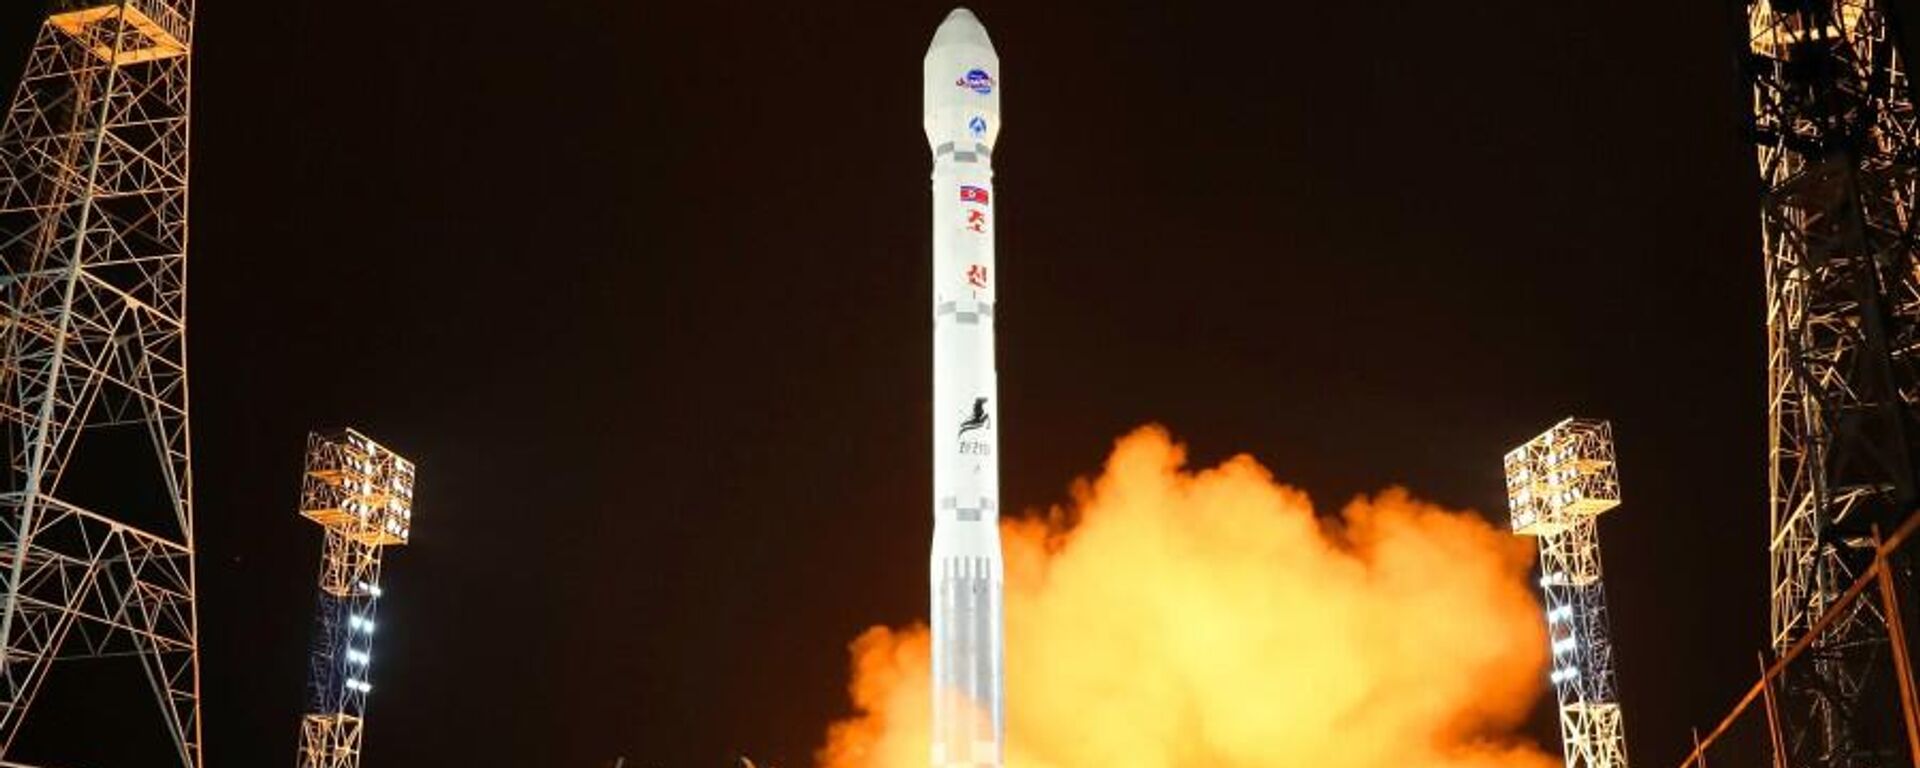 The General Bureau of Aerospace Engineering of the DPRK successfully launched the Manrigyong-1 reconnaissance satellite at 22 hours, 42 minutes and 28 seconds on November 21, 112 Juche (2023) using a new type of Chollima-1 carrier rocket from Sohae Space Center in Cholsan County, North Pyongan Province. - Sputnik International, 1920, 27.11.2023